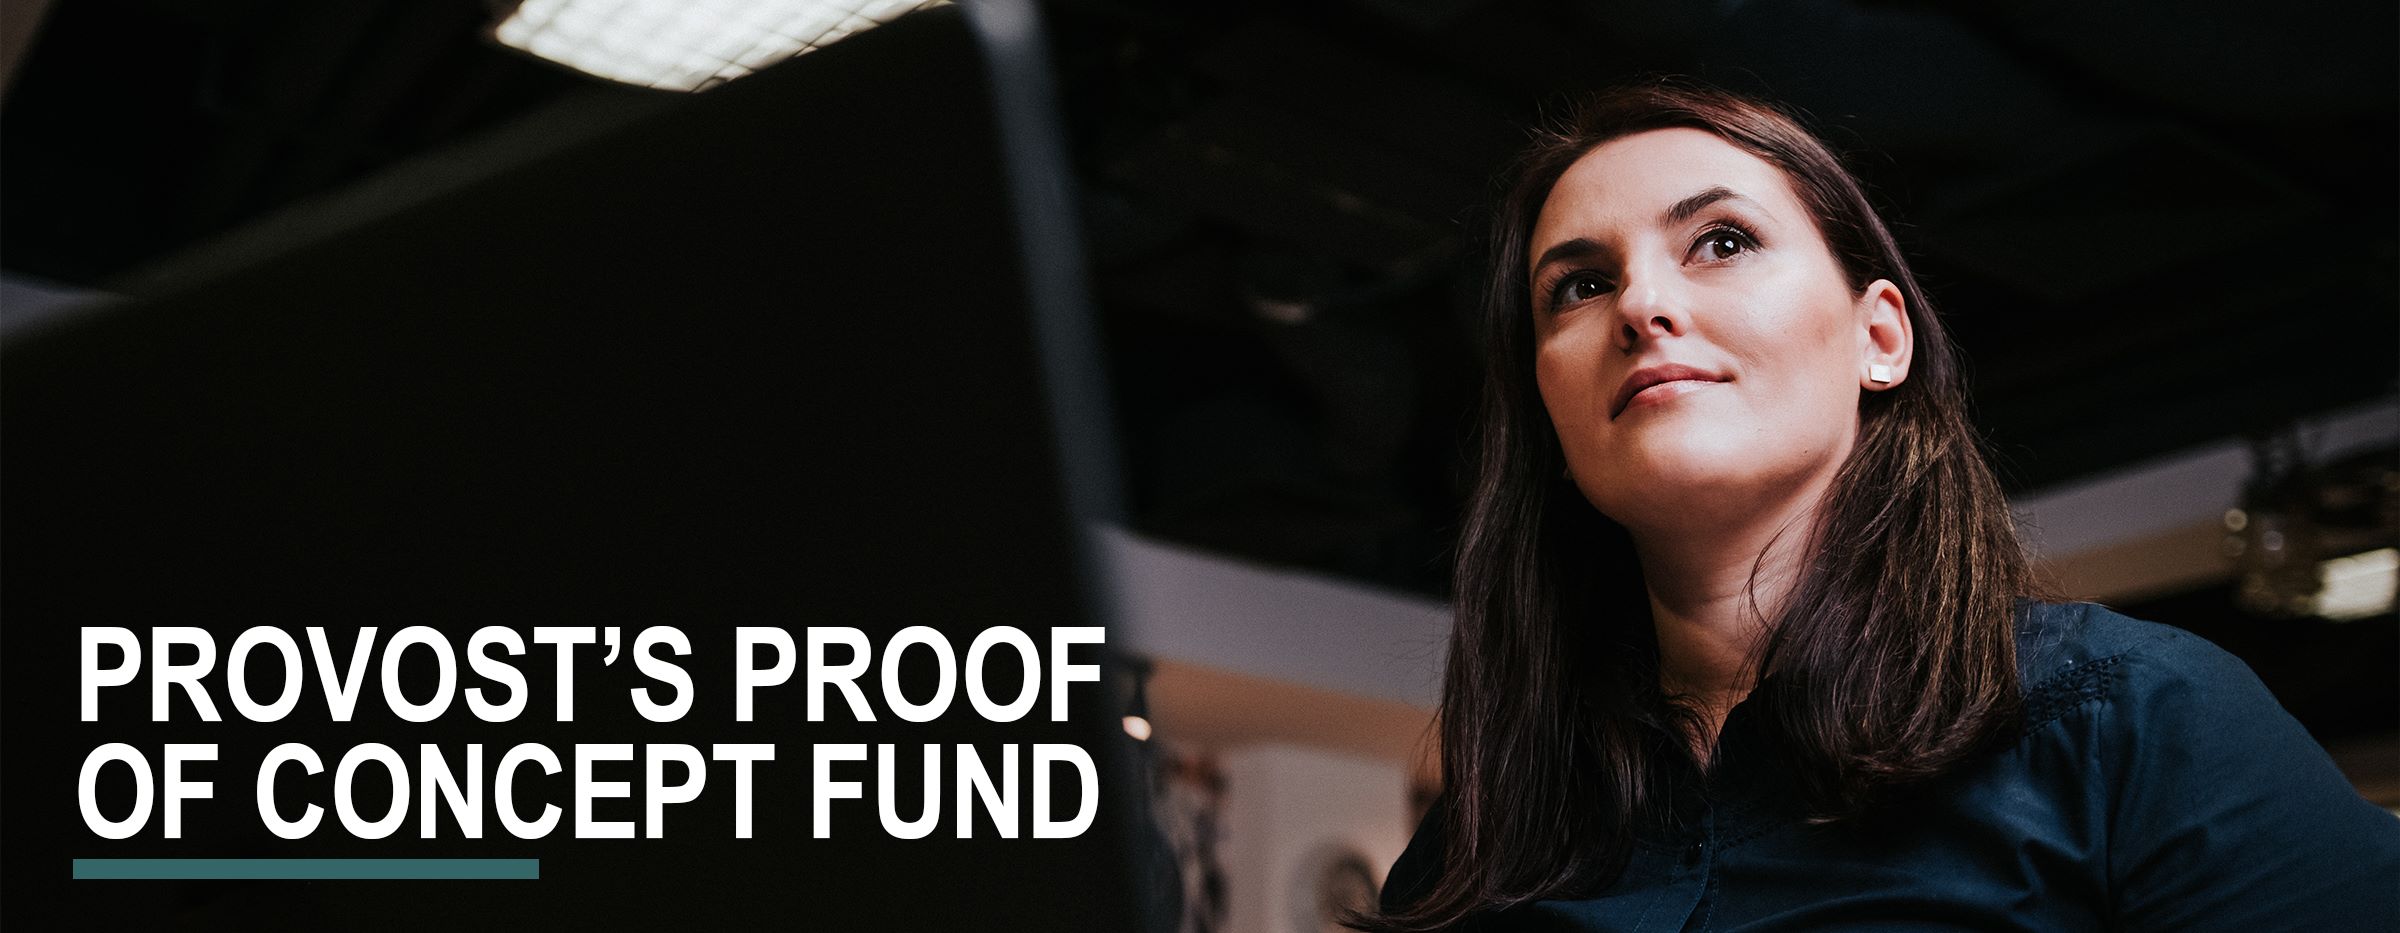 Provost's Proof of Concept Fund